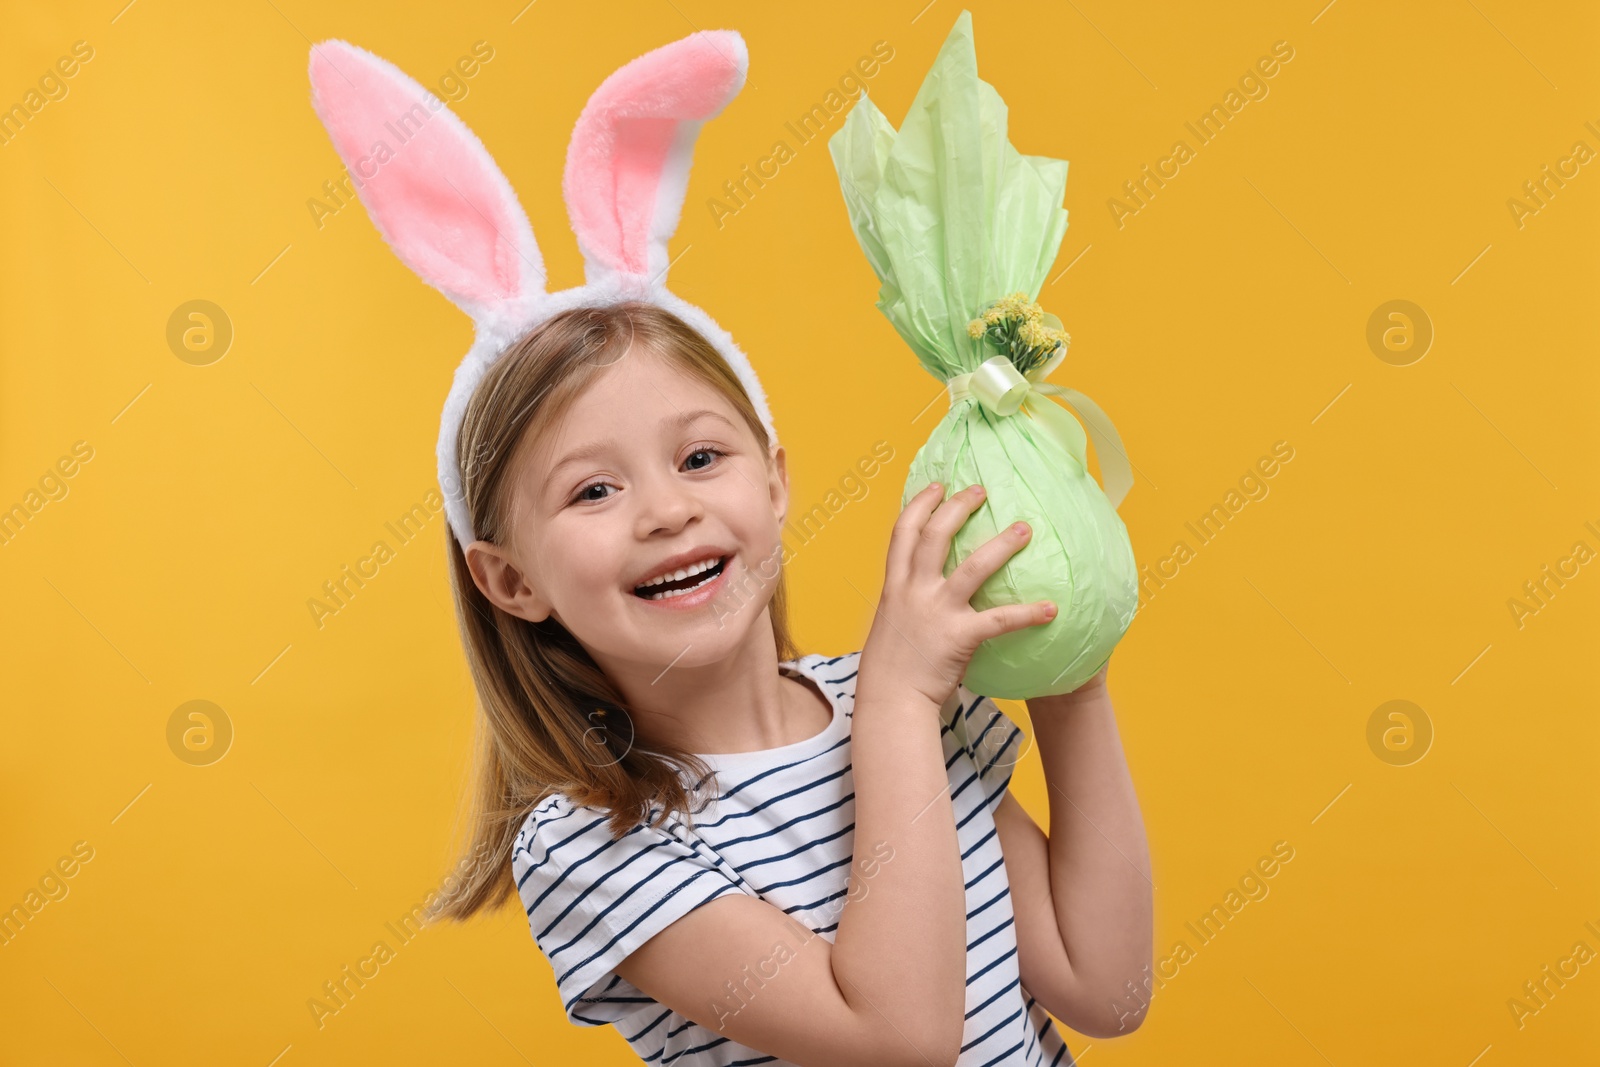 Photo of Easter celebration. Cute girl with bunny ears holding wrapped gift on orange background